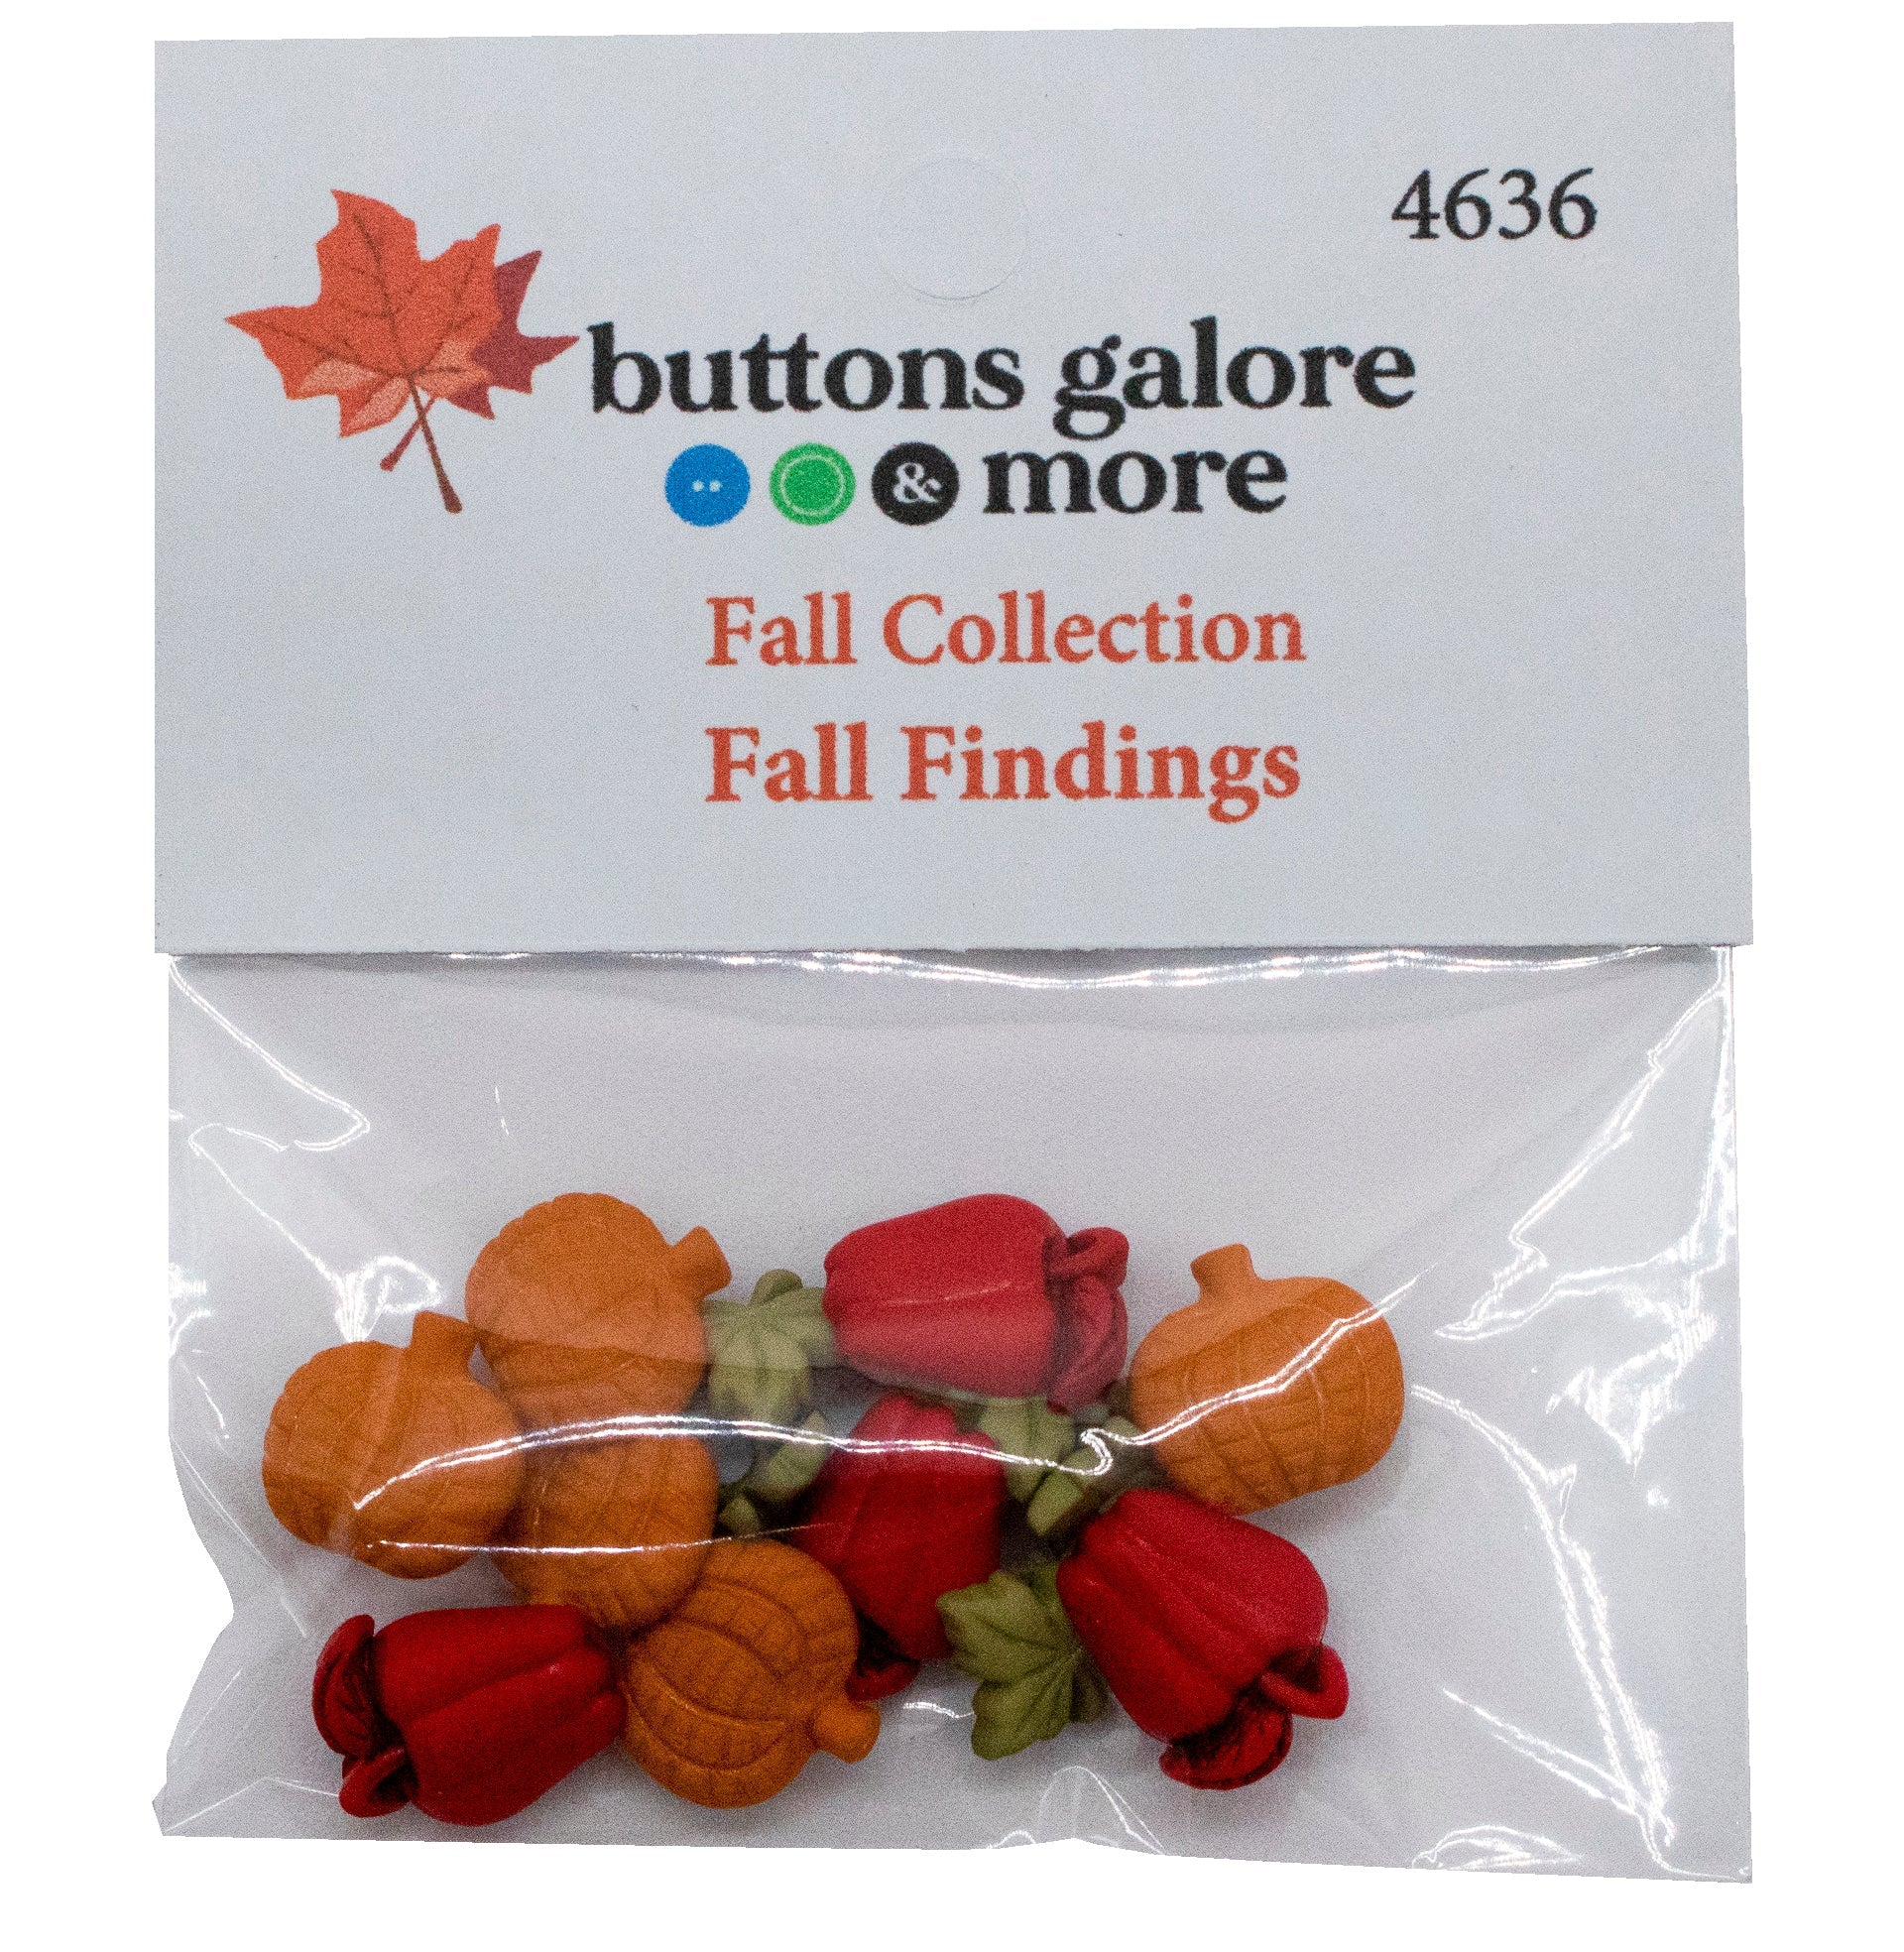 Fall Findings - Buttons Galore and More